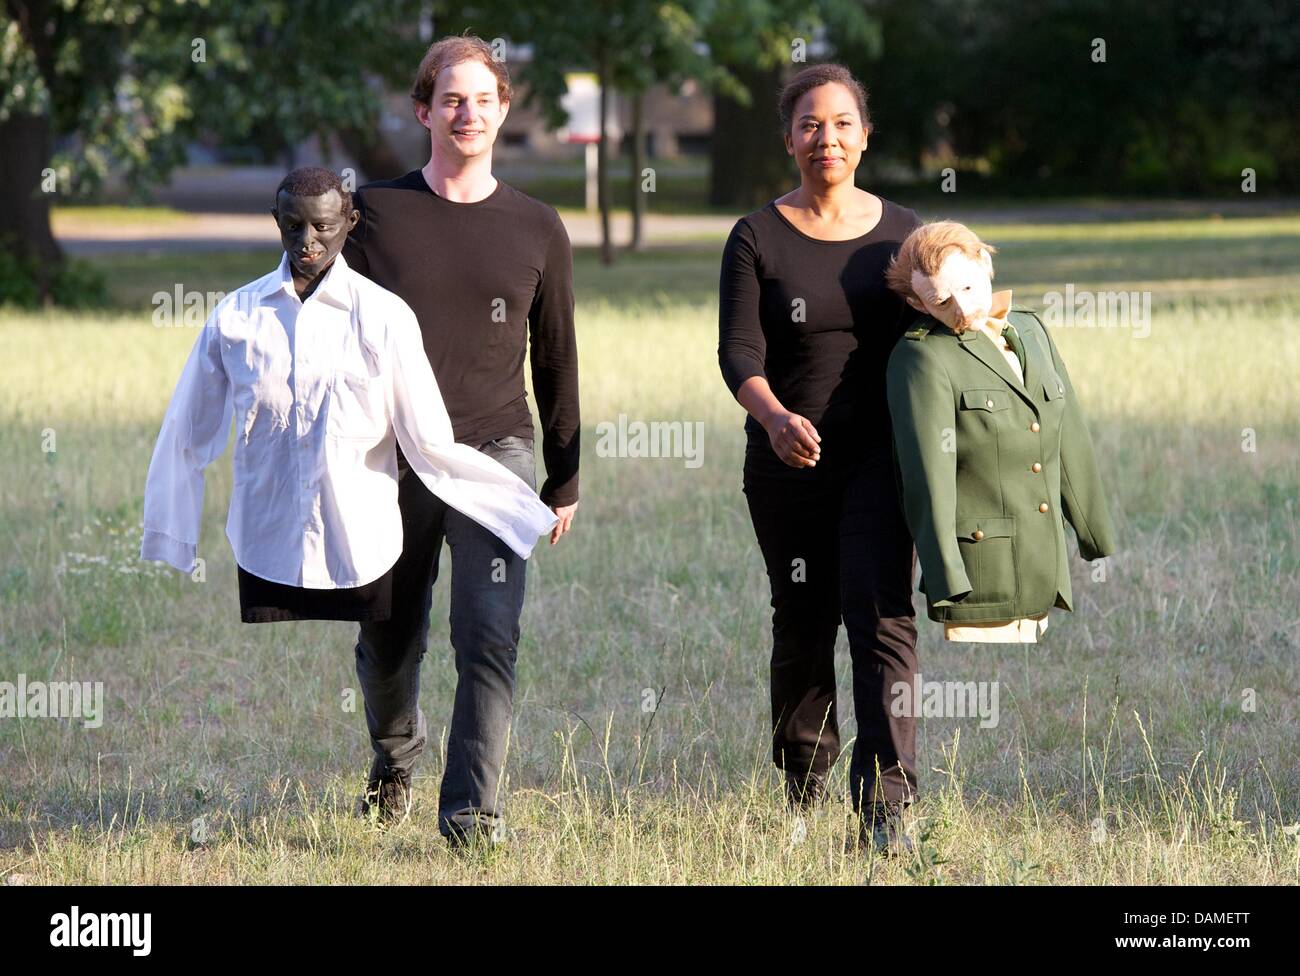 Actors Jan Kersjes (L) and Abak Safaei-Rad from Anhaltinische Theater Dessau carry dolls representing Oury Jalloh (L) and a police officer in the Stadtpark in Dessau, Germany, 09 June 2011. The theatre is thematisizing the tragic death by fire of asylum seeker Oury Jalloh in a police cell with a play directed by Nina Guehlstorff and Dorothea Schroeder. There will be four performanc Stock Photo